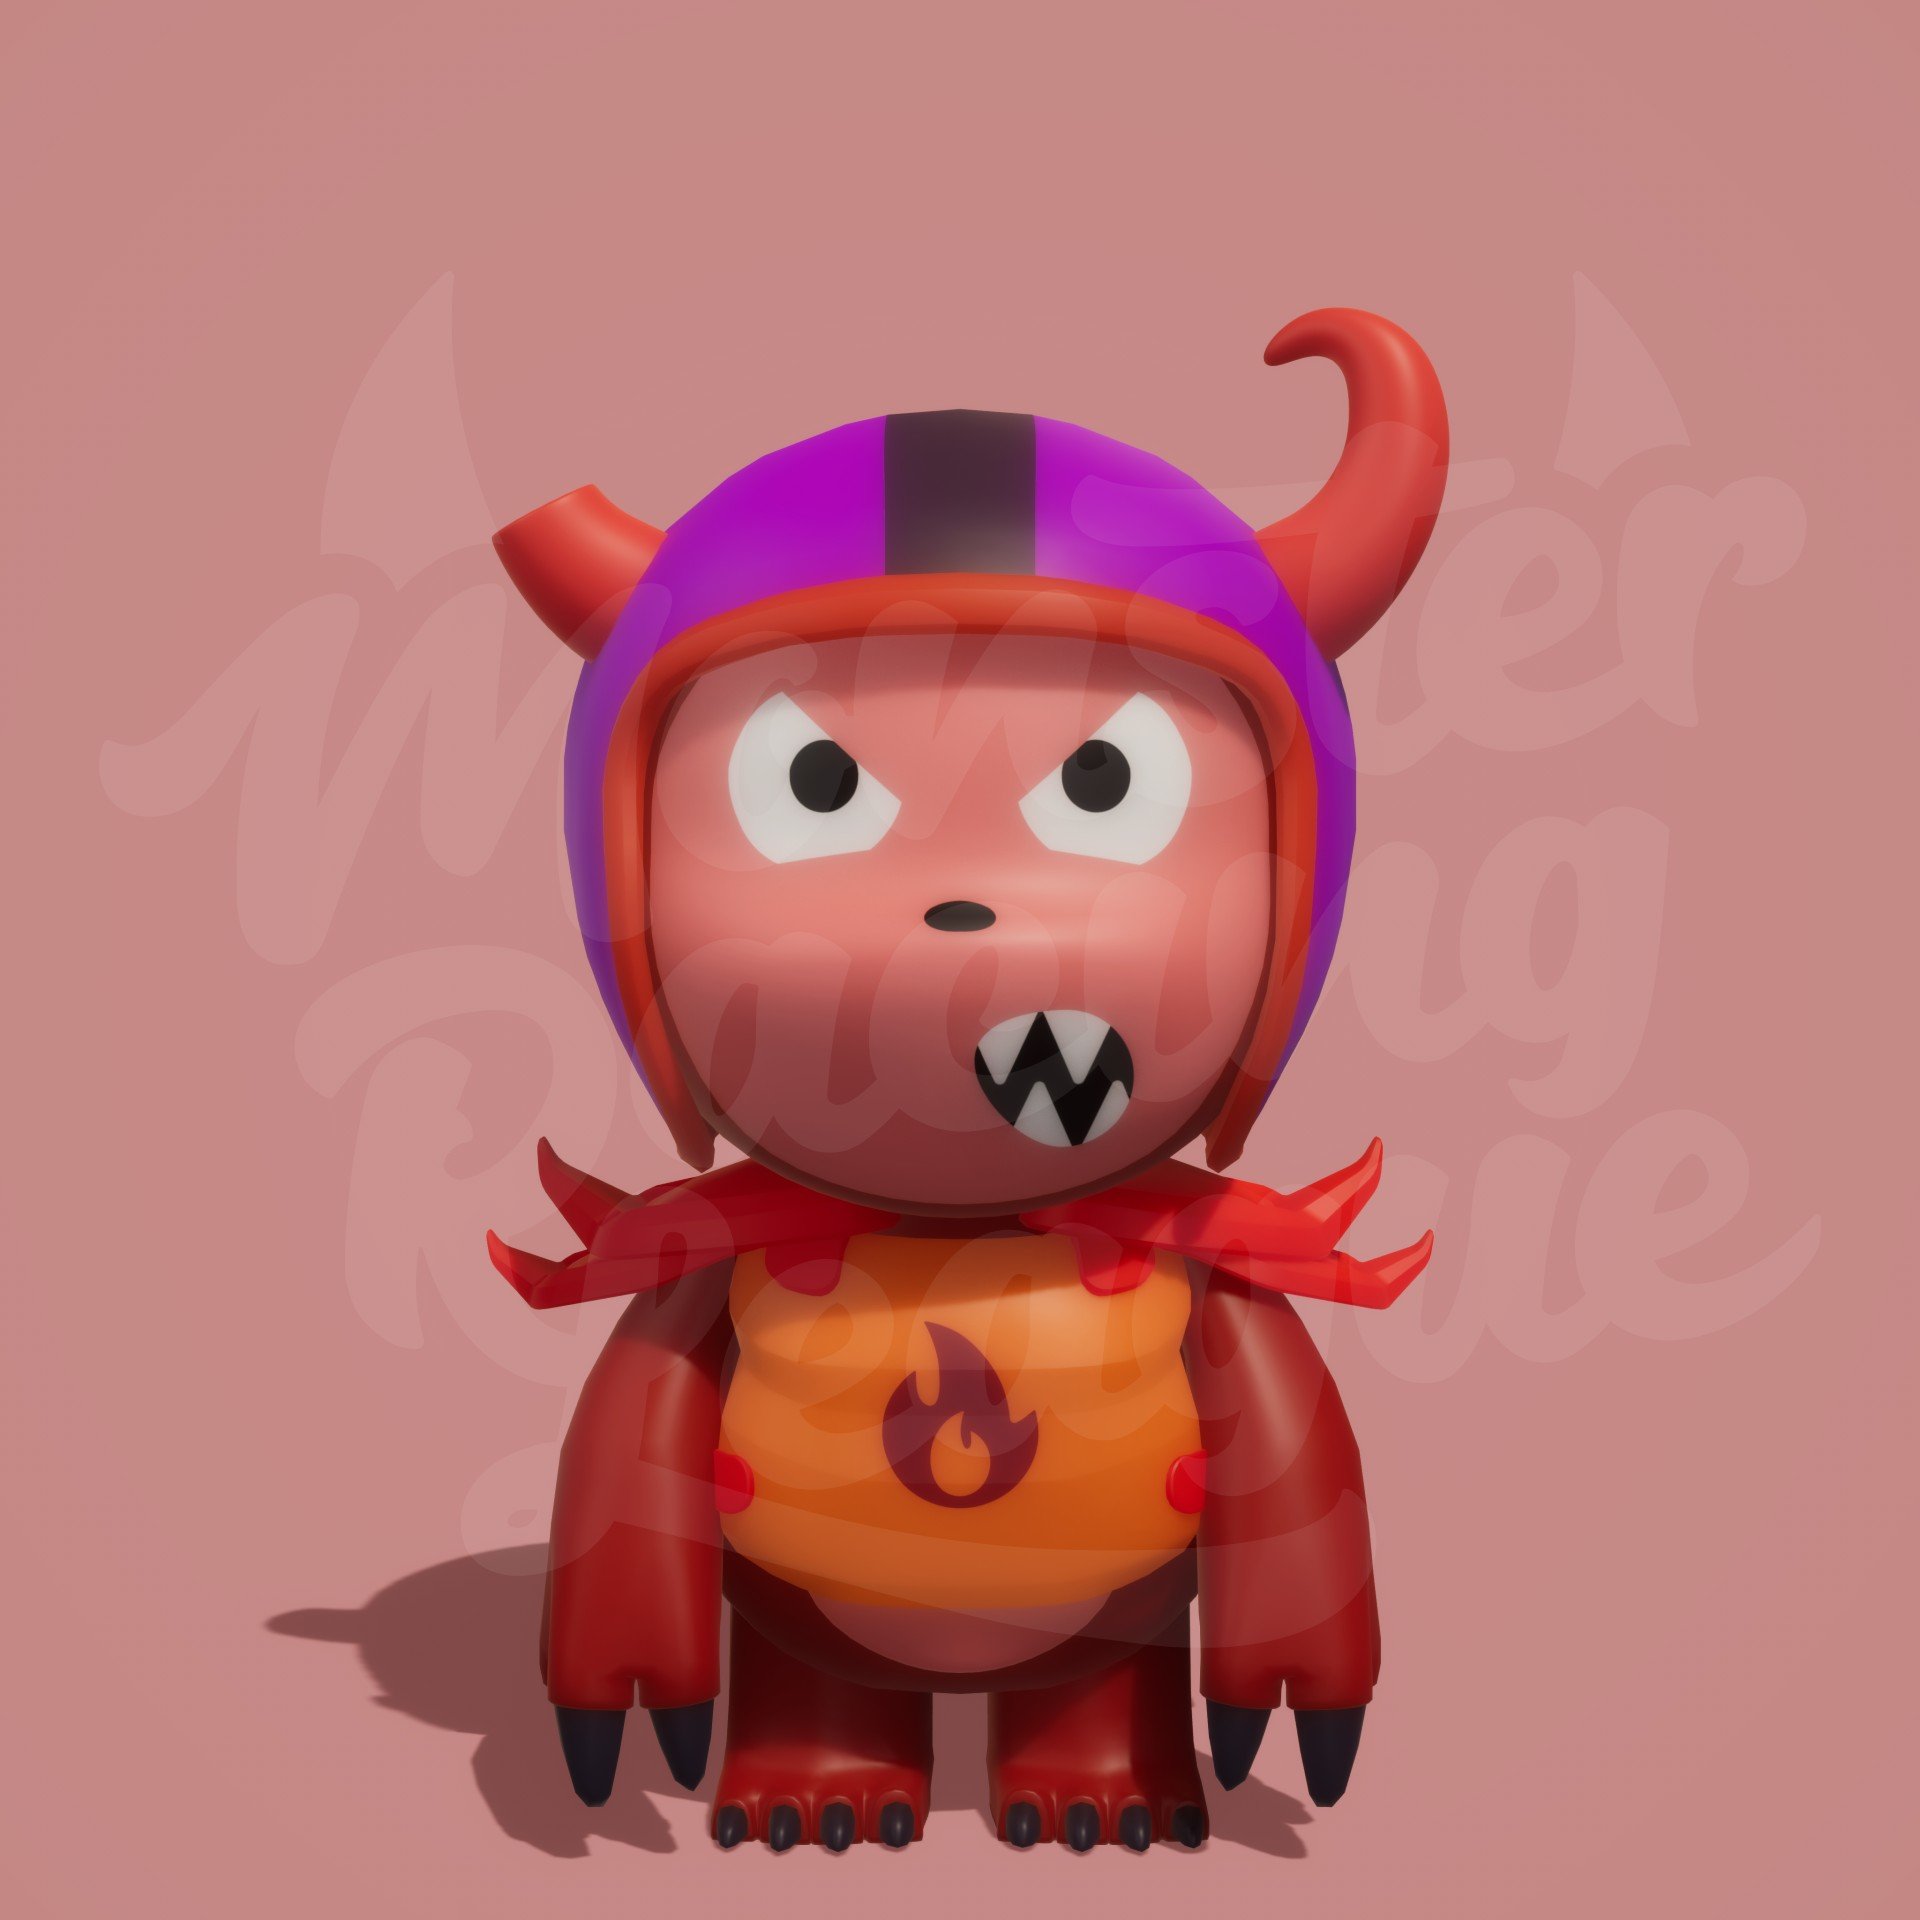 An orange monster with pink helmet from Monster Racing League